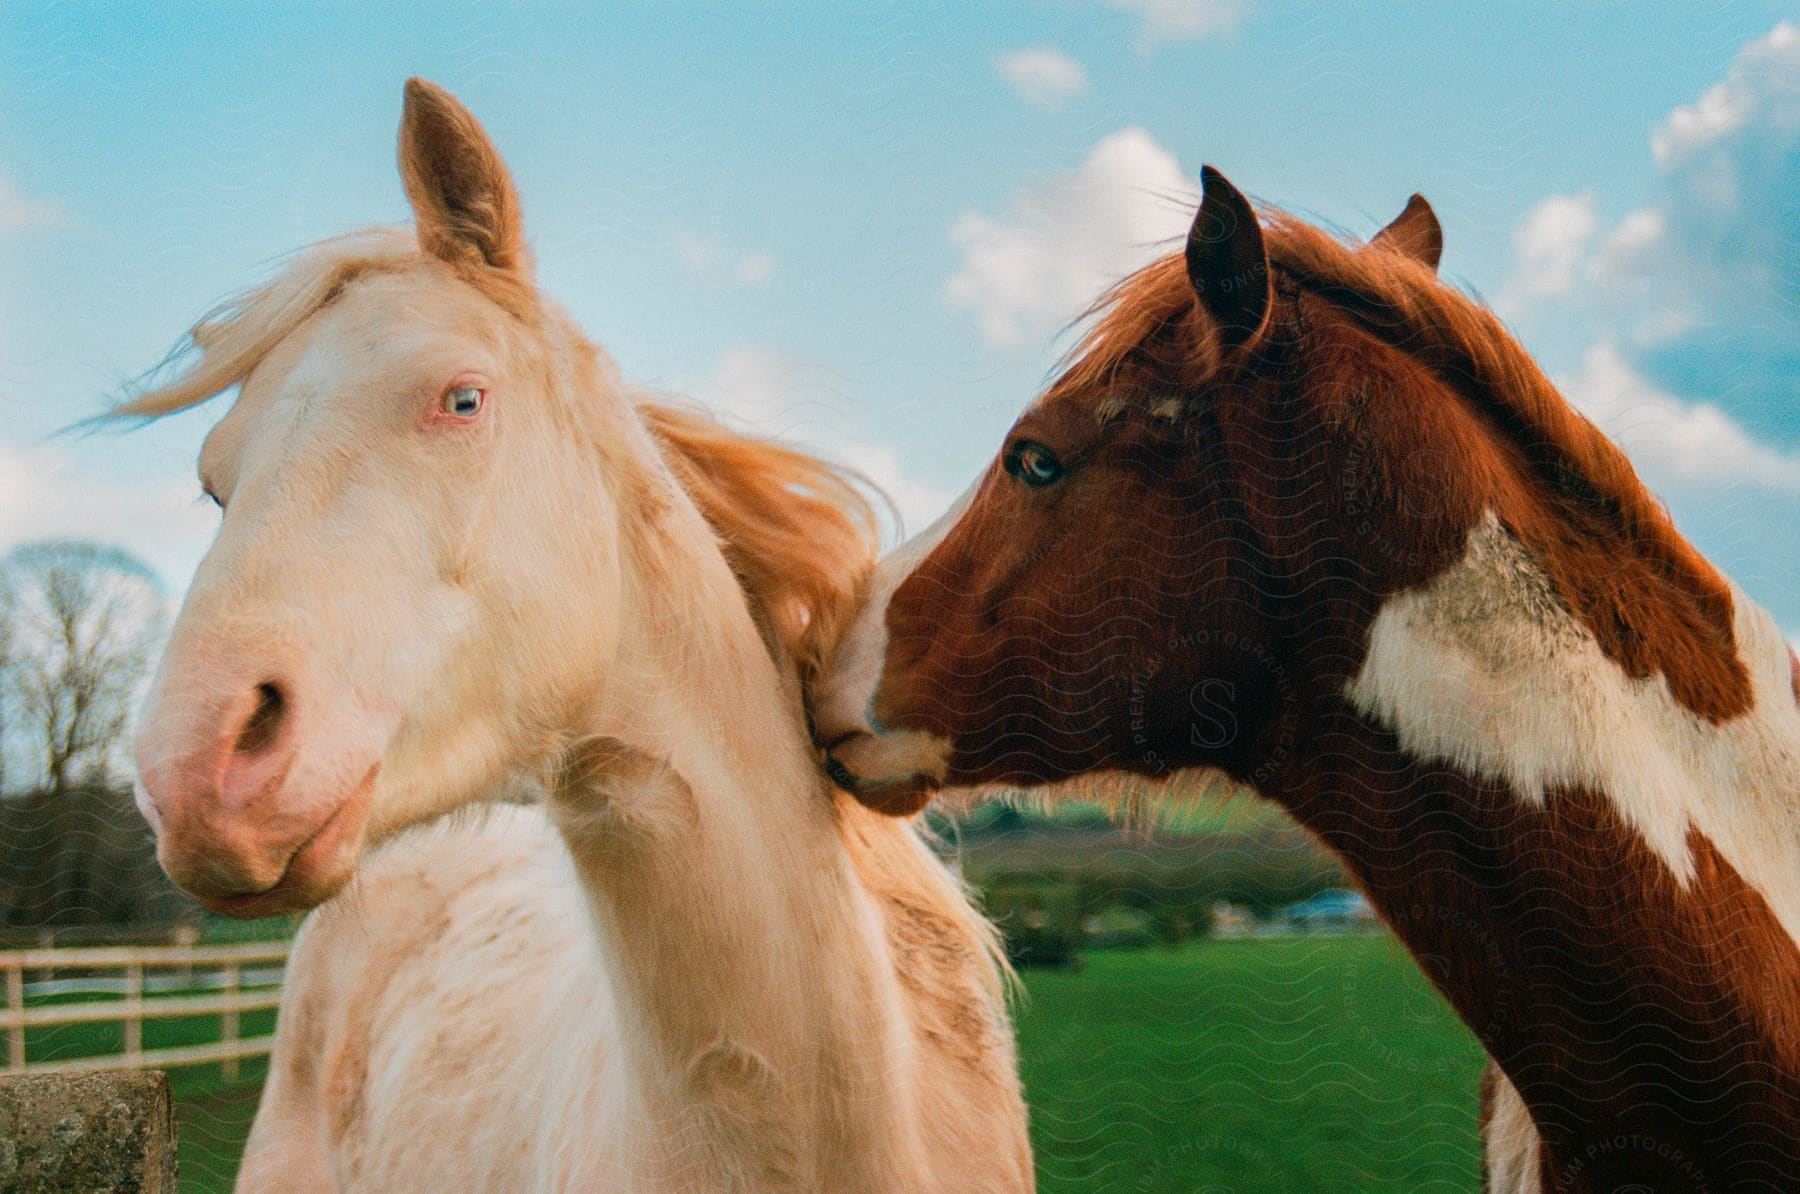 Two horses in the same position and one of them has its nose in the other's neck.